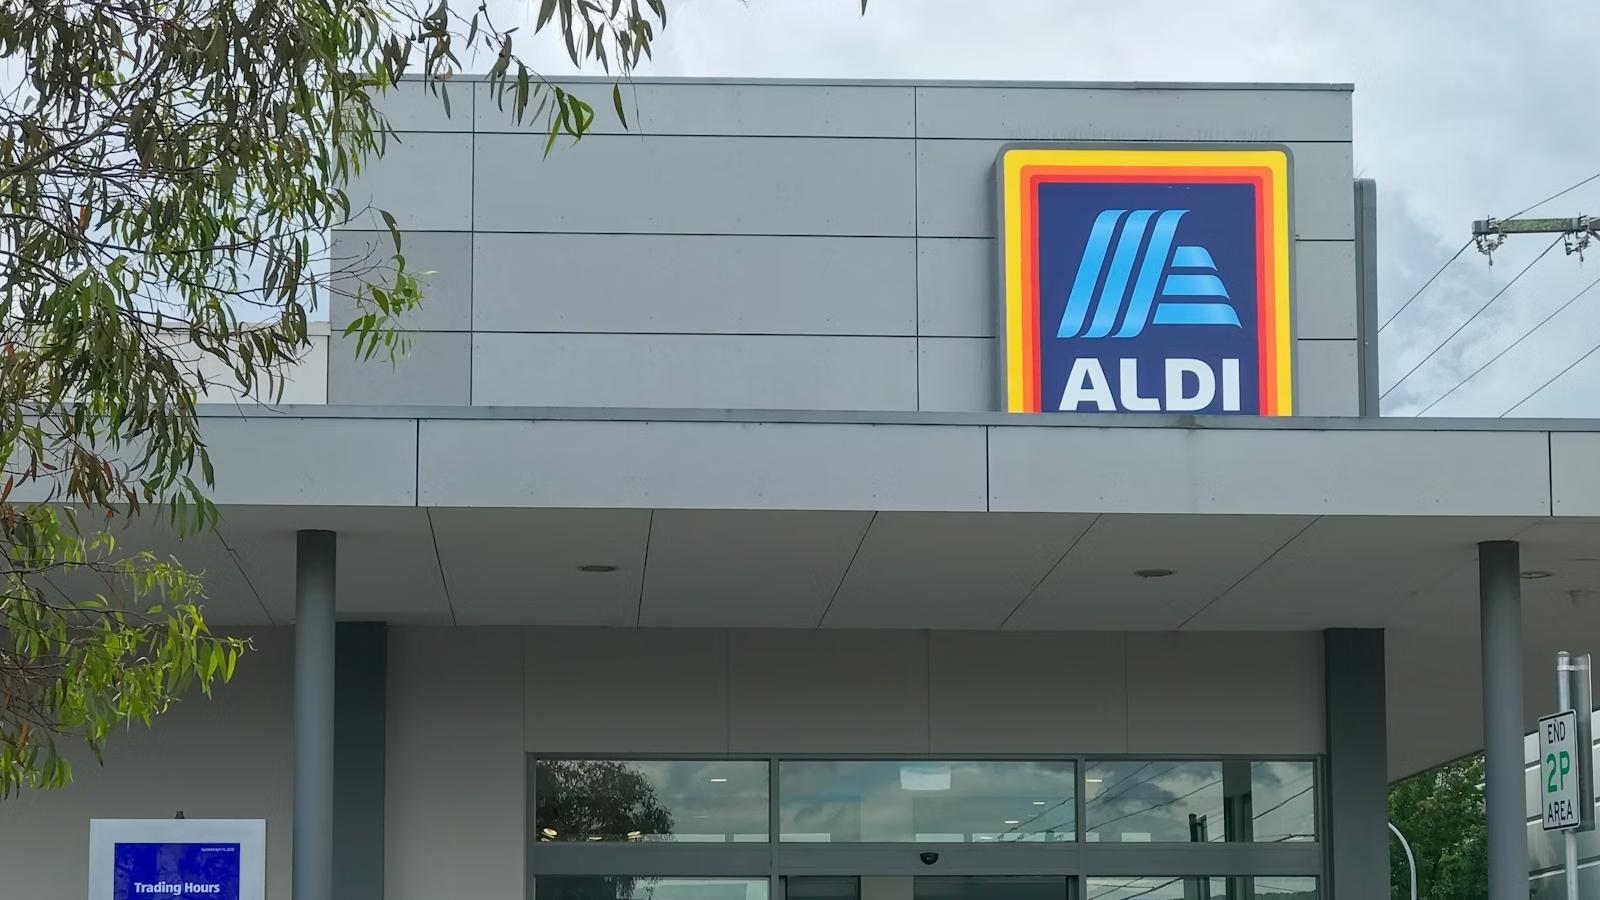 Aldi customer shares brilliant revenge plan after being forced to wait in queue